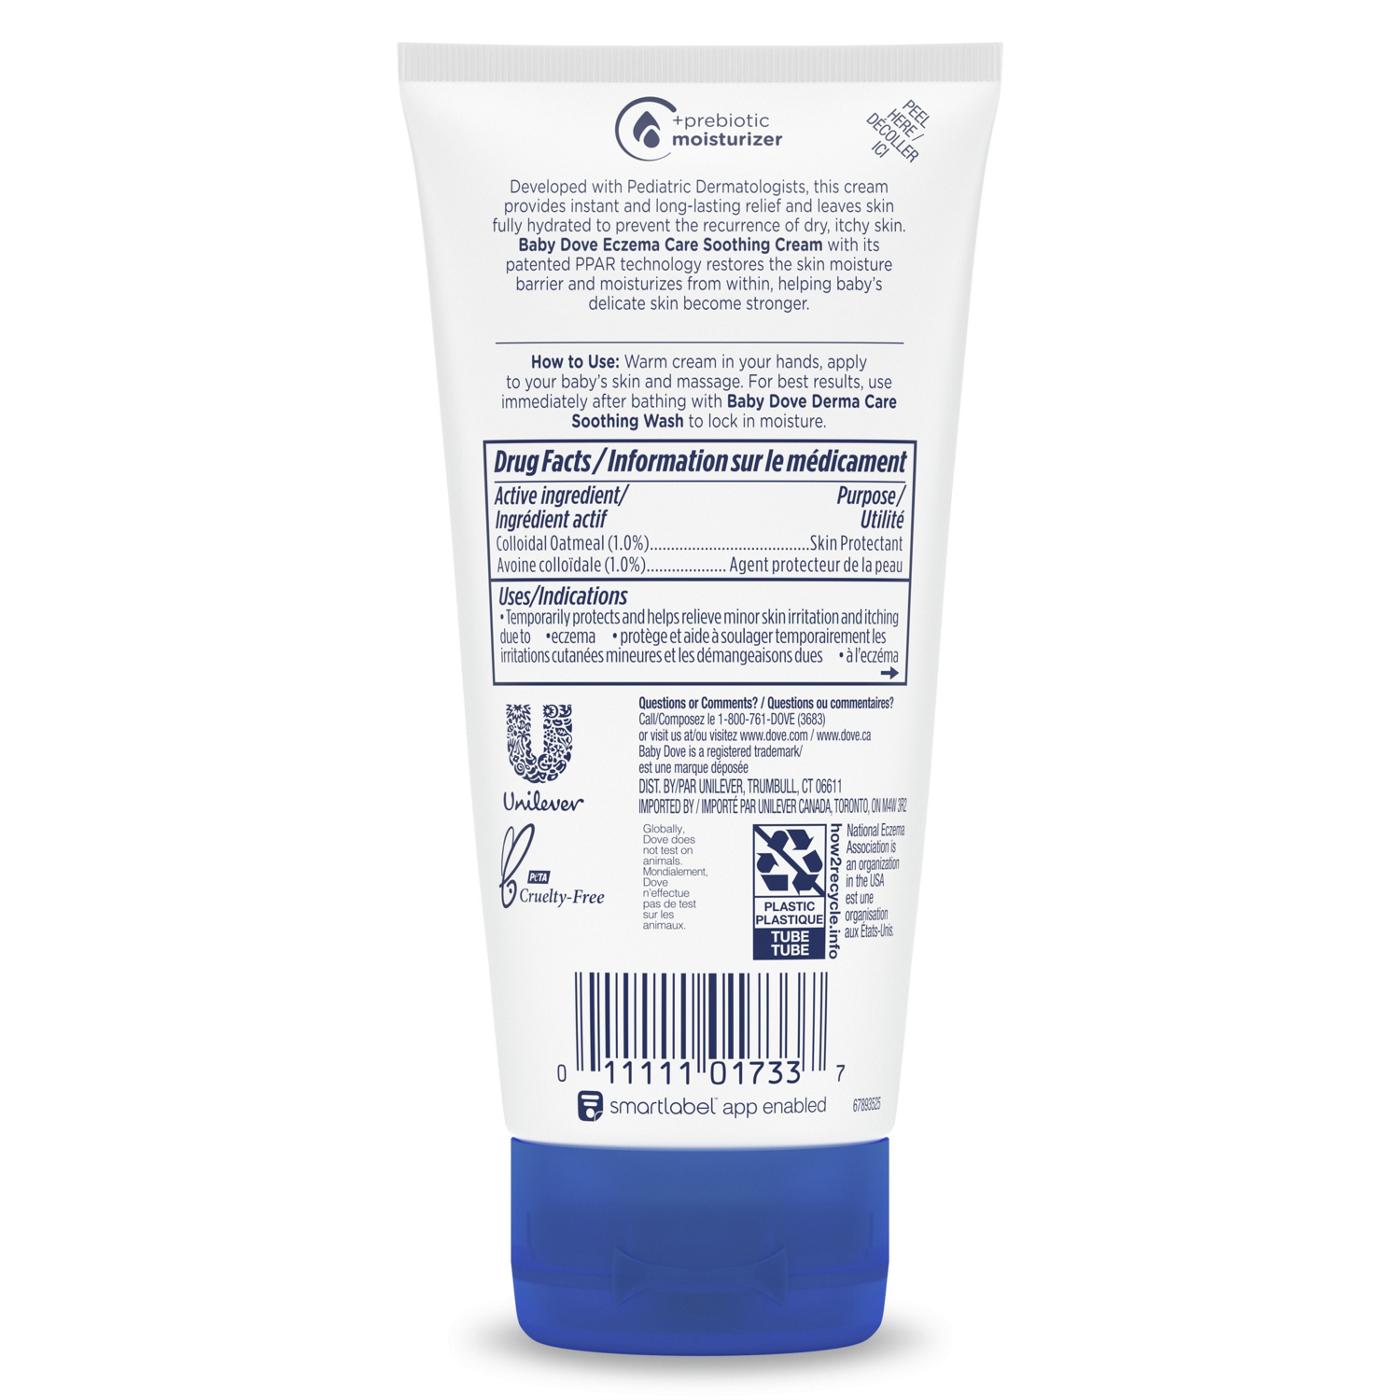 Baby Dove Eczema Care Soothing Cream; image 5 of 5